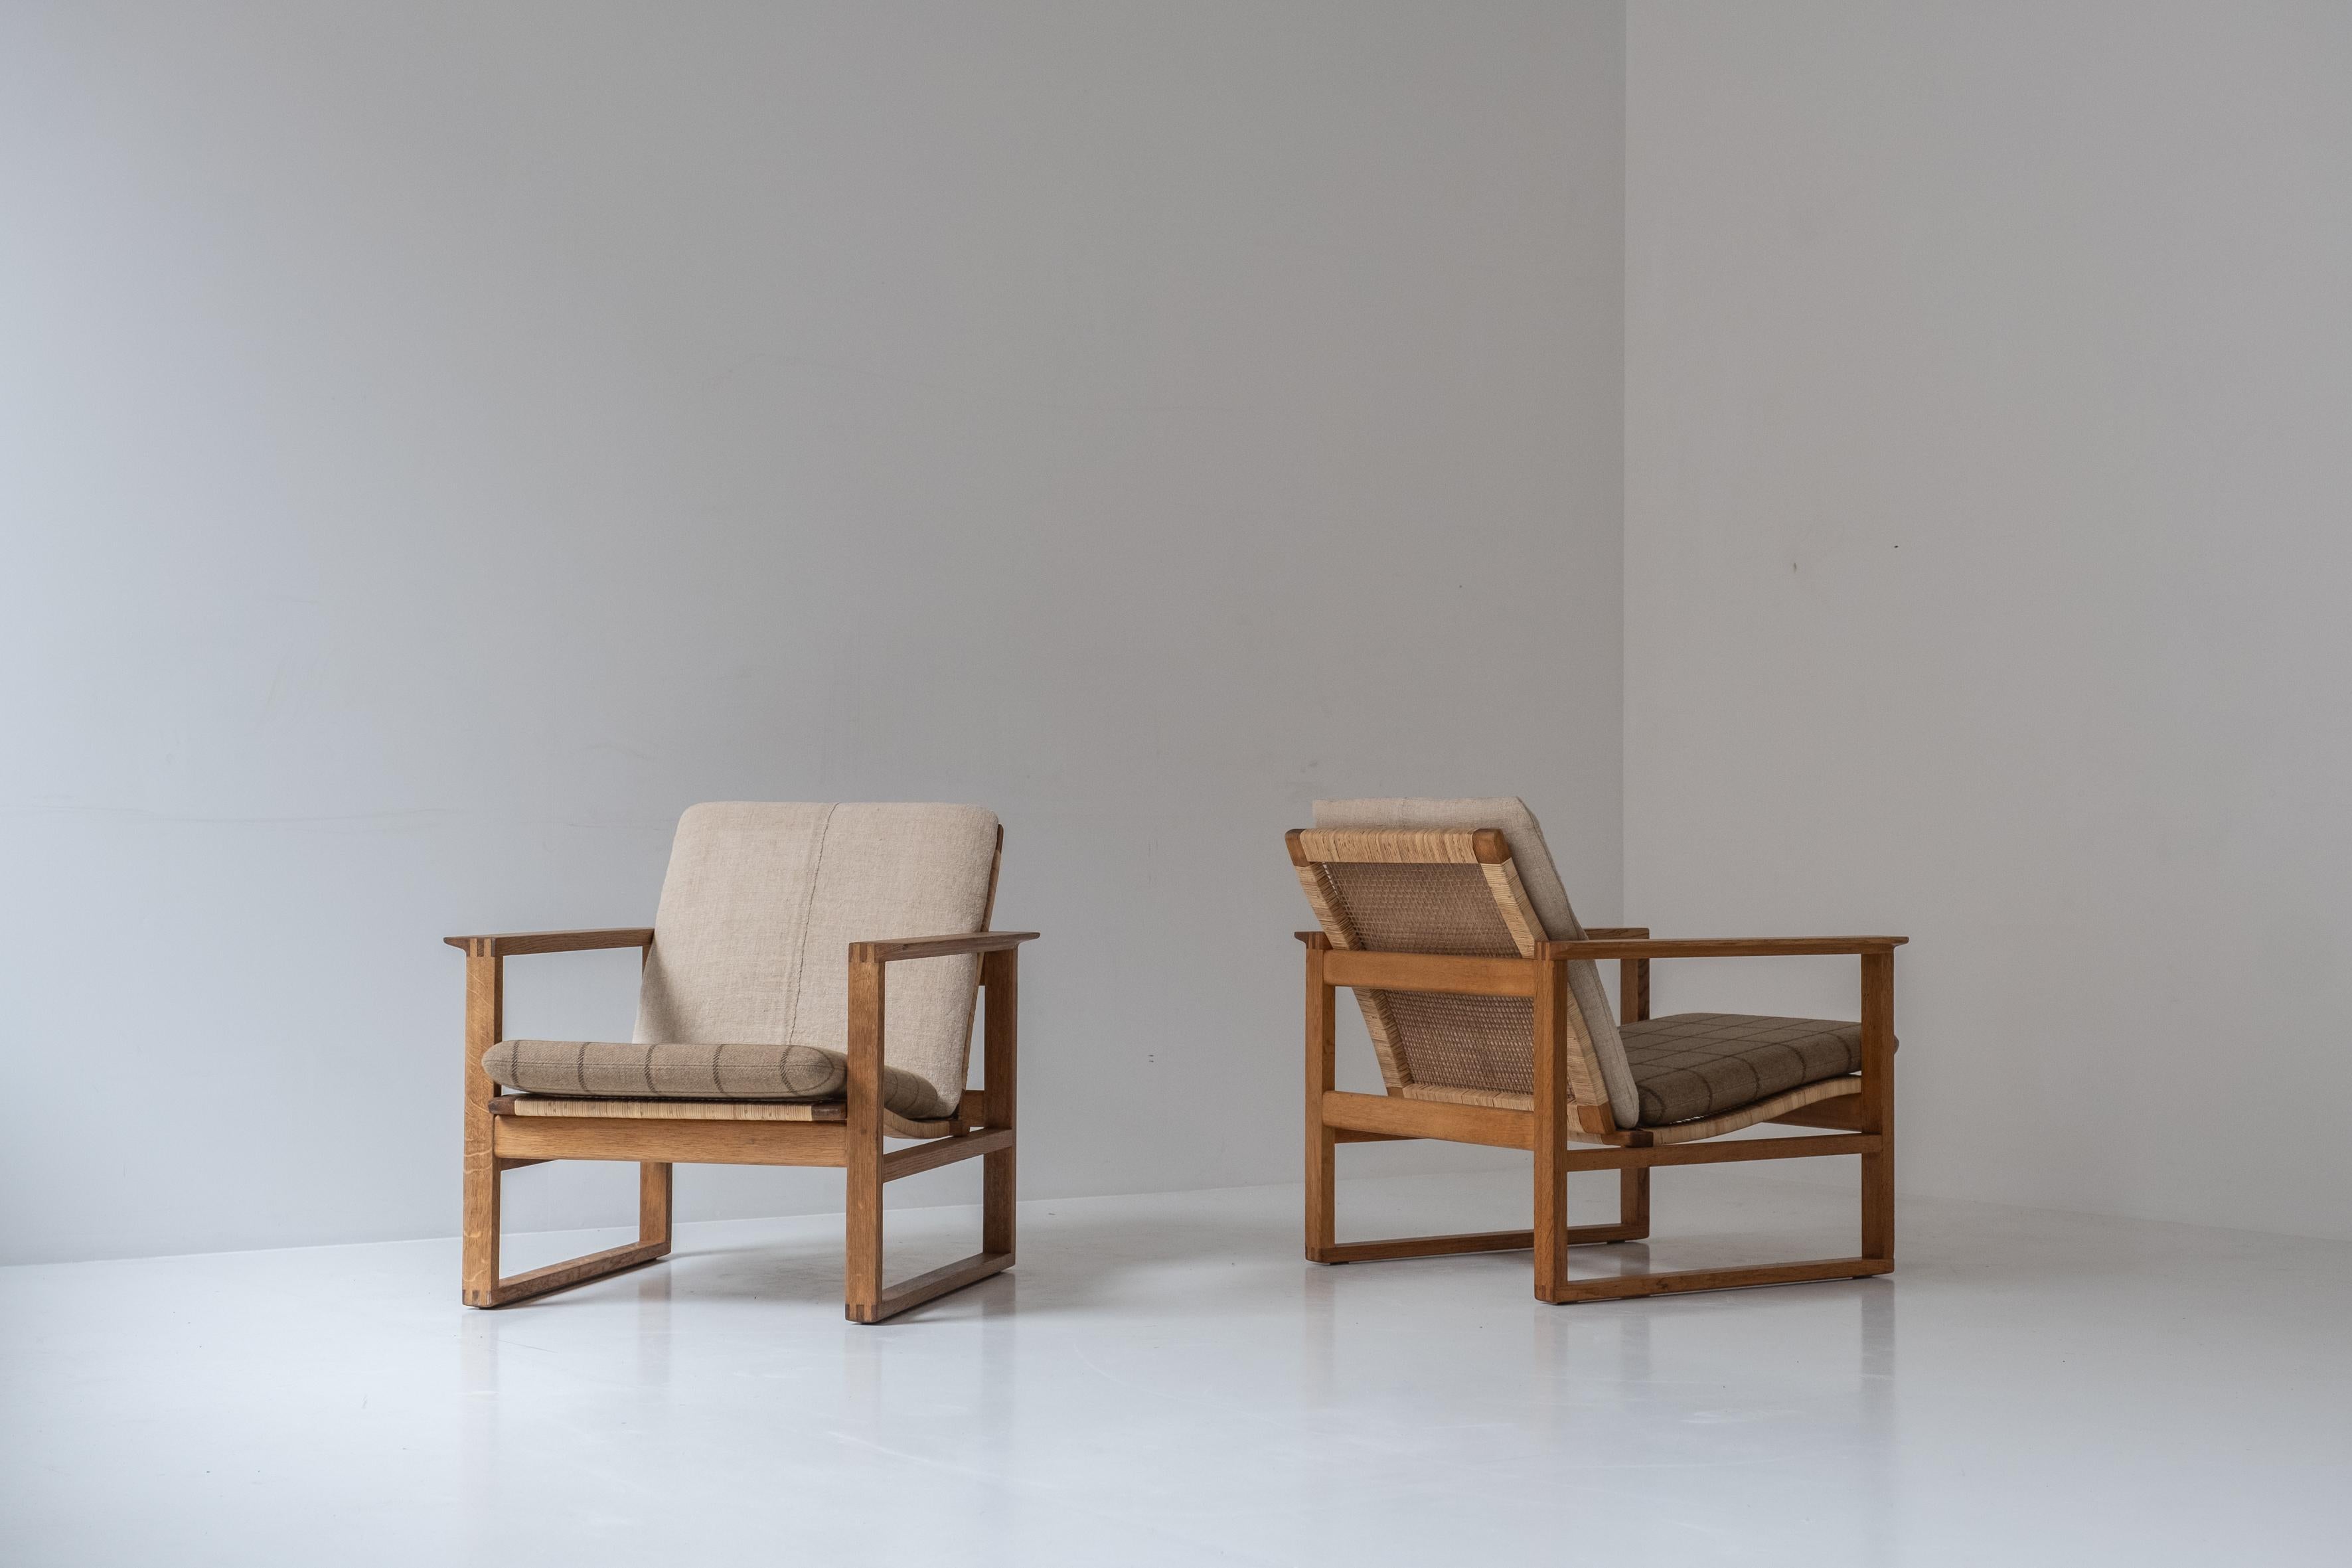 Magnificent set of two model 2256 easy chairs by Børge Mogensen for Fredericia Stolefabrik, Denmark 1956. This sledge chair features frames made out of oak with cane seats and backs, presented in a very good condition with soft overall patina.